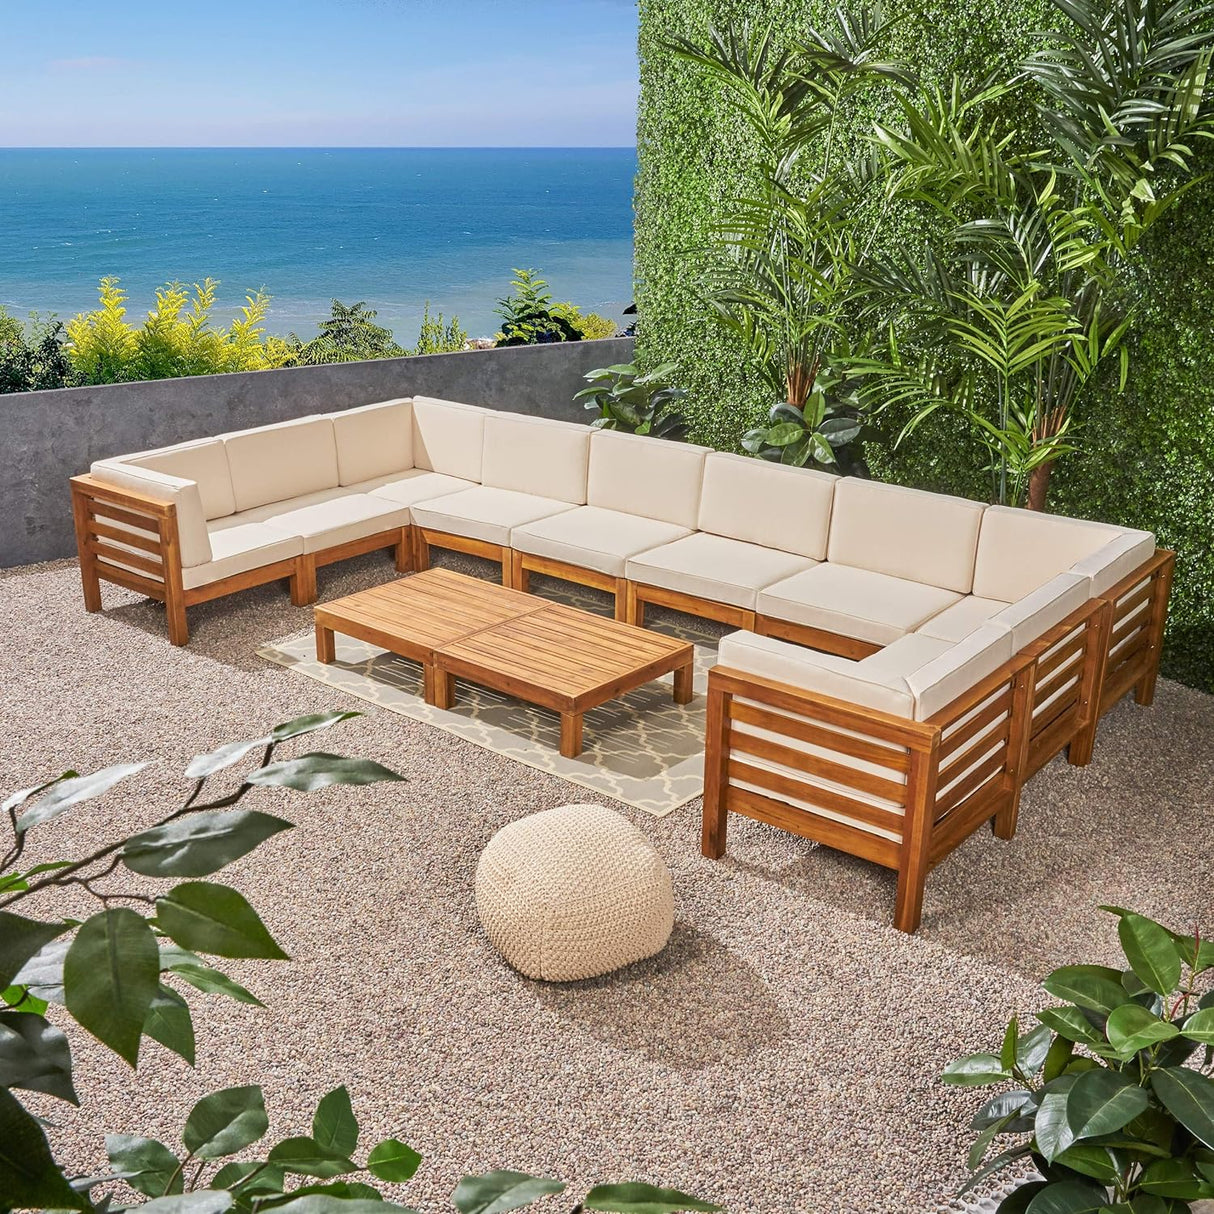 Annabelle Outdoor U-Shaped Sectional Sofa Set with Coffee Tables - 12-Piece 10-Seater - Acacia Wood - Outdoor Cushions - Teak and Beige